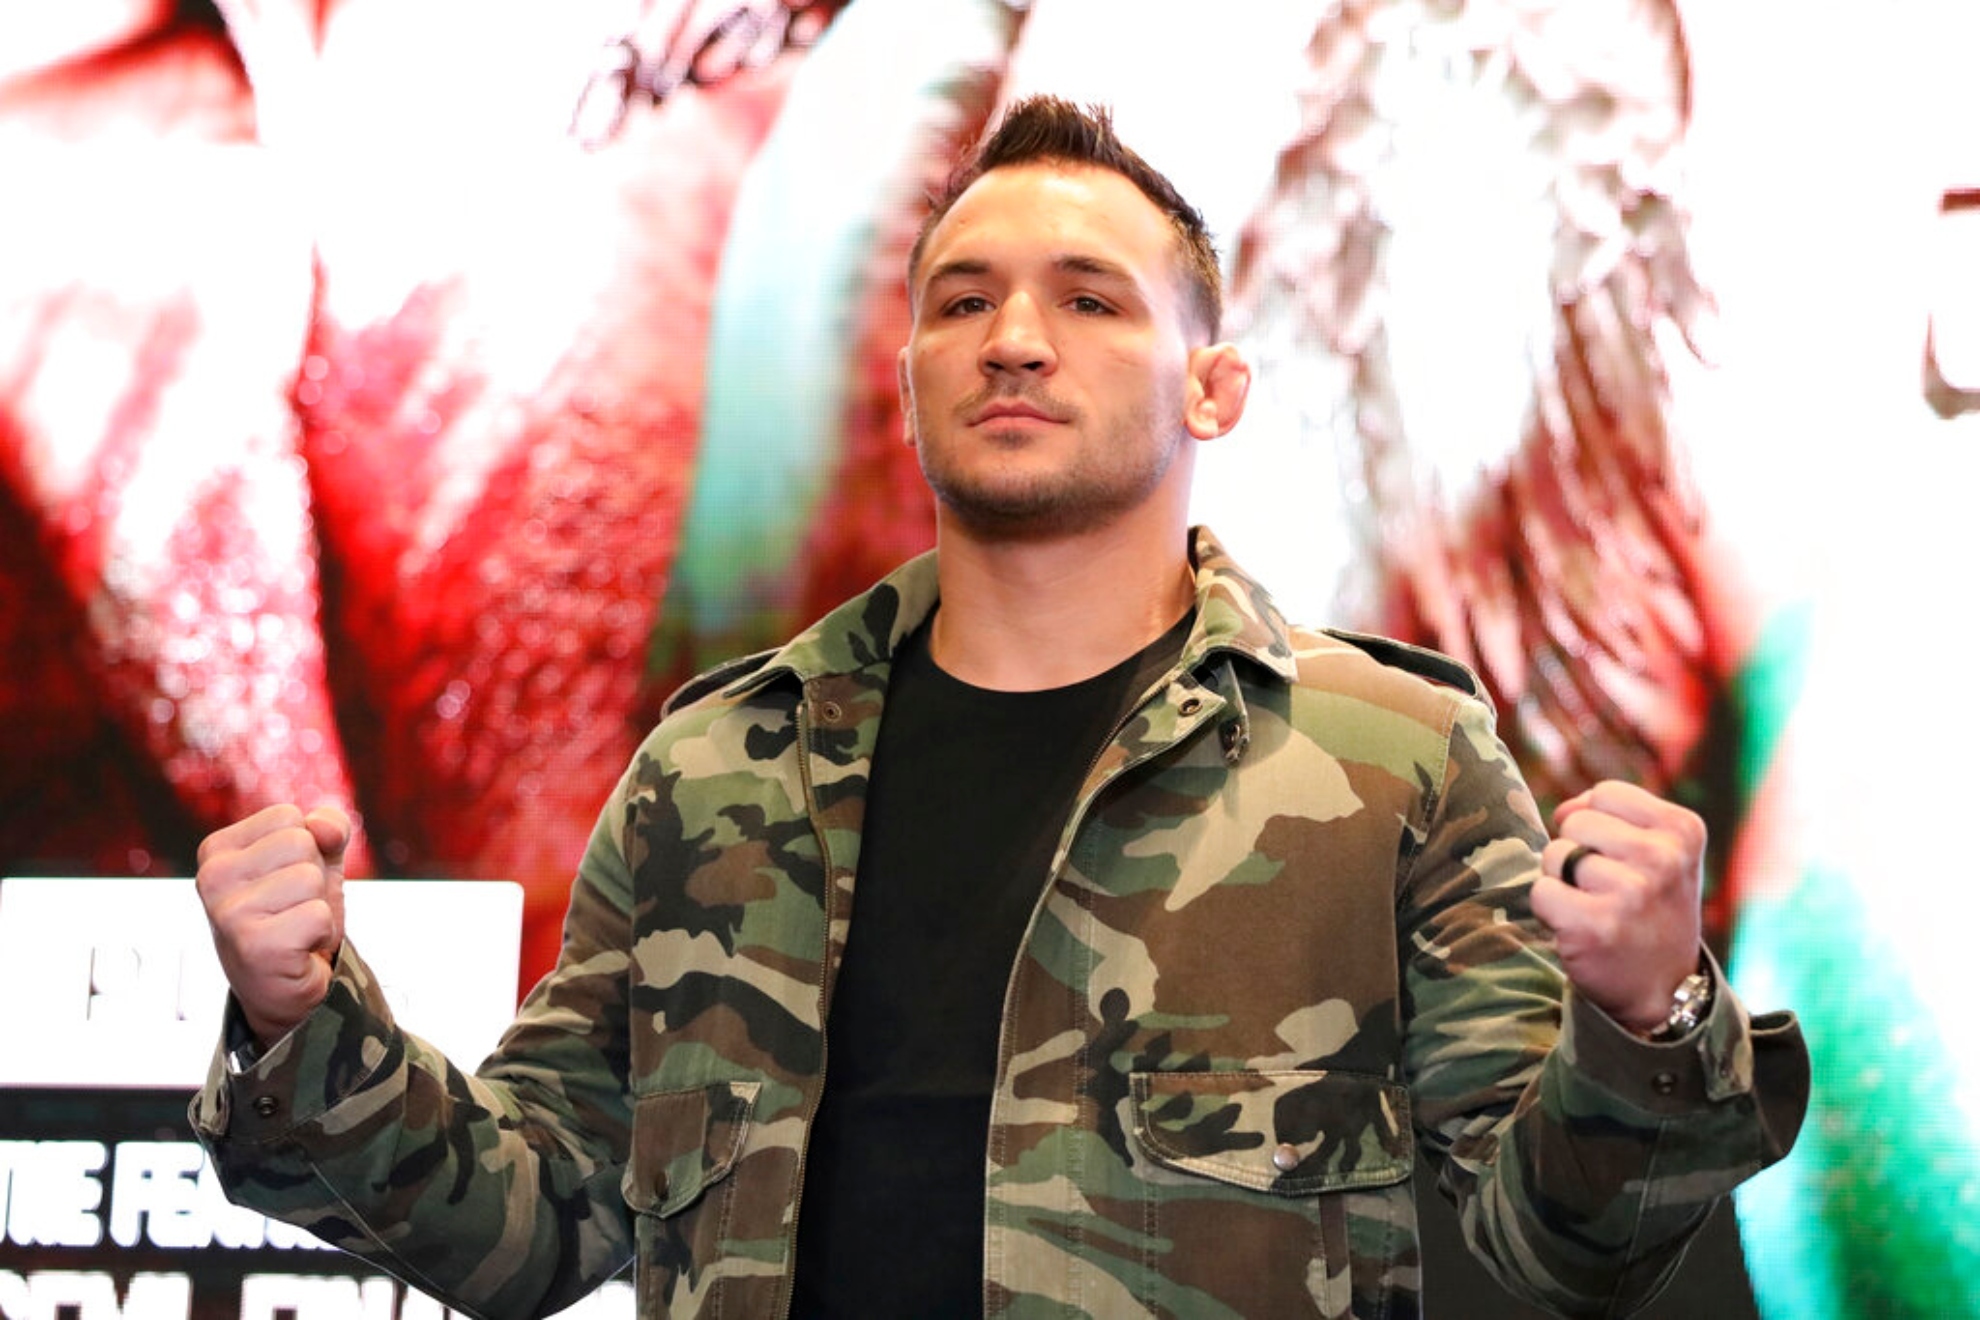 Michael Chandler claps back at those who criticized waiting to fight Conor McGregor while in his prime